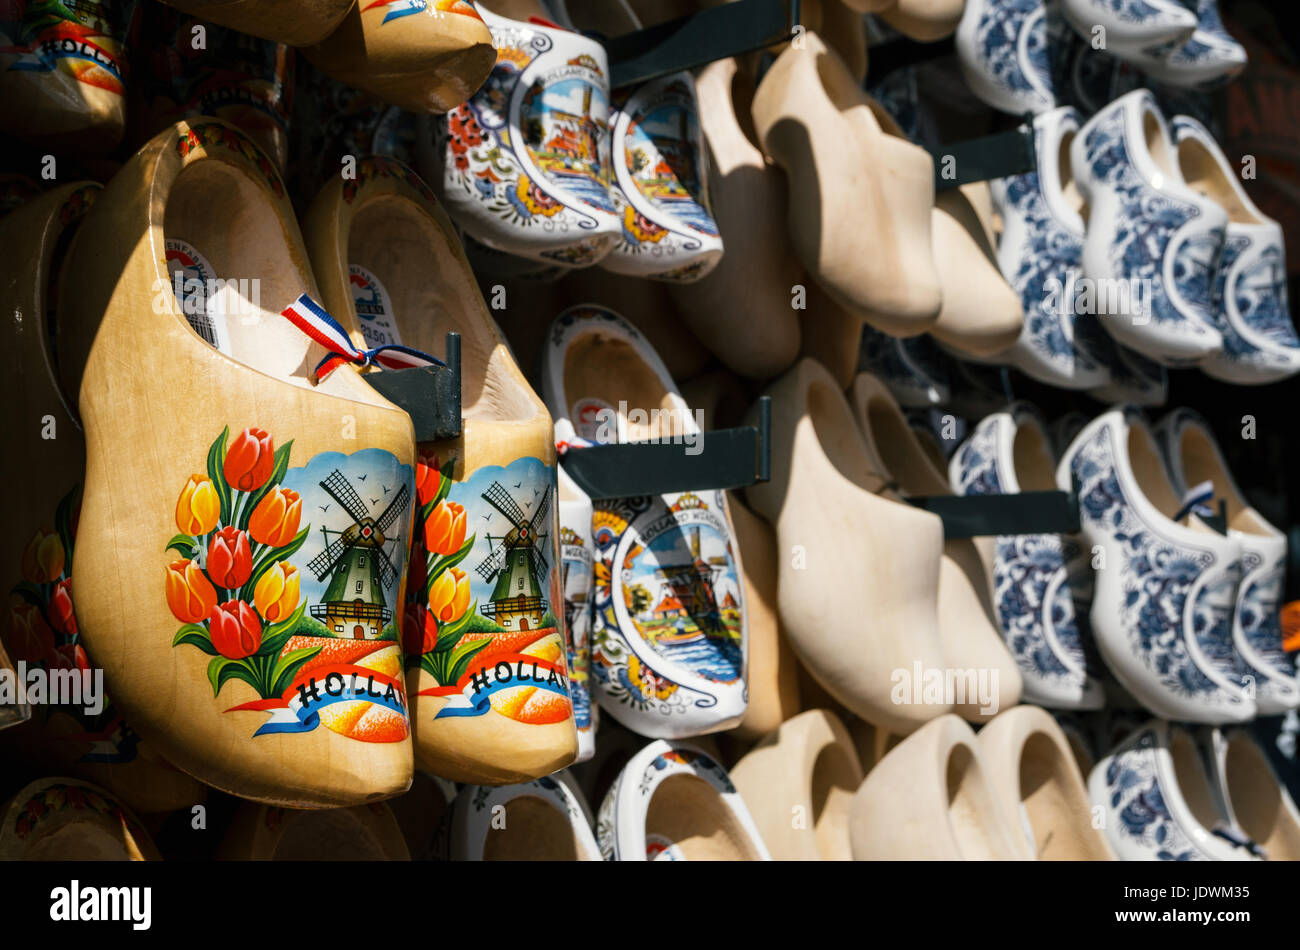 Volendam, Netherlands - 26 April, 2017: klomp or klompen - dutch clogs made of poplar wood, traditional shoes with colorful paintings. Popular Netherl Stock Photo